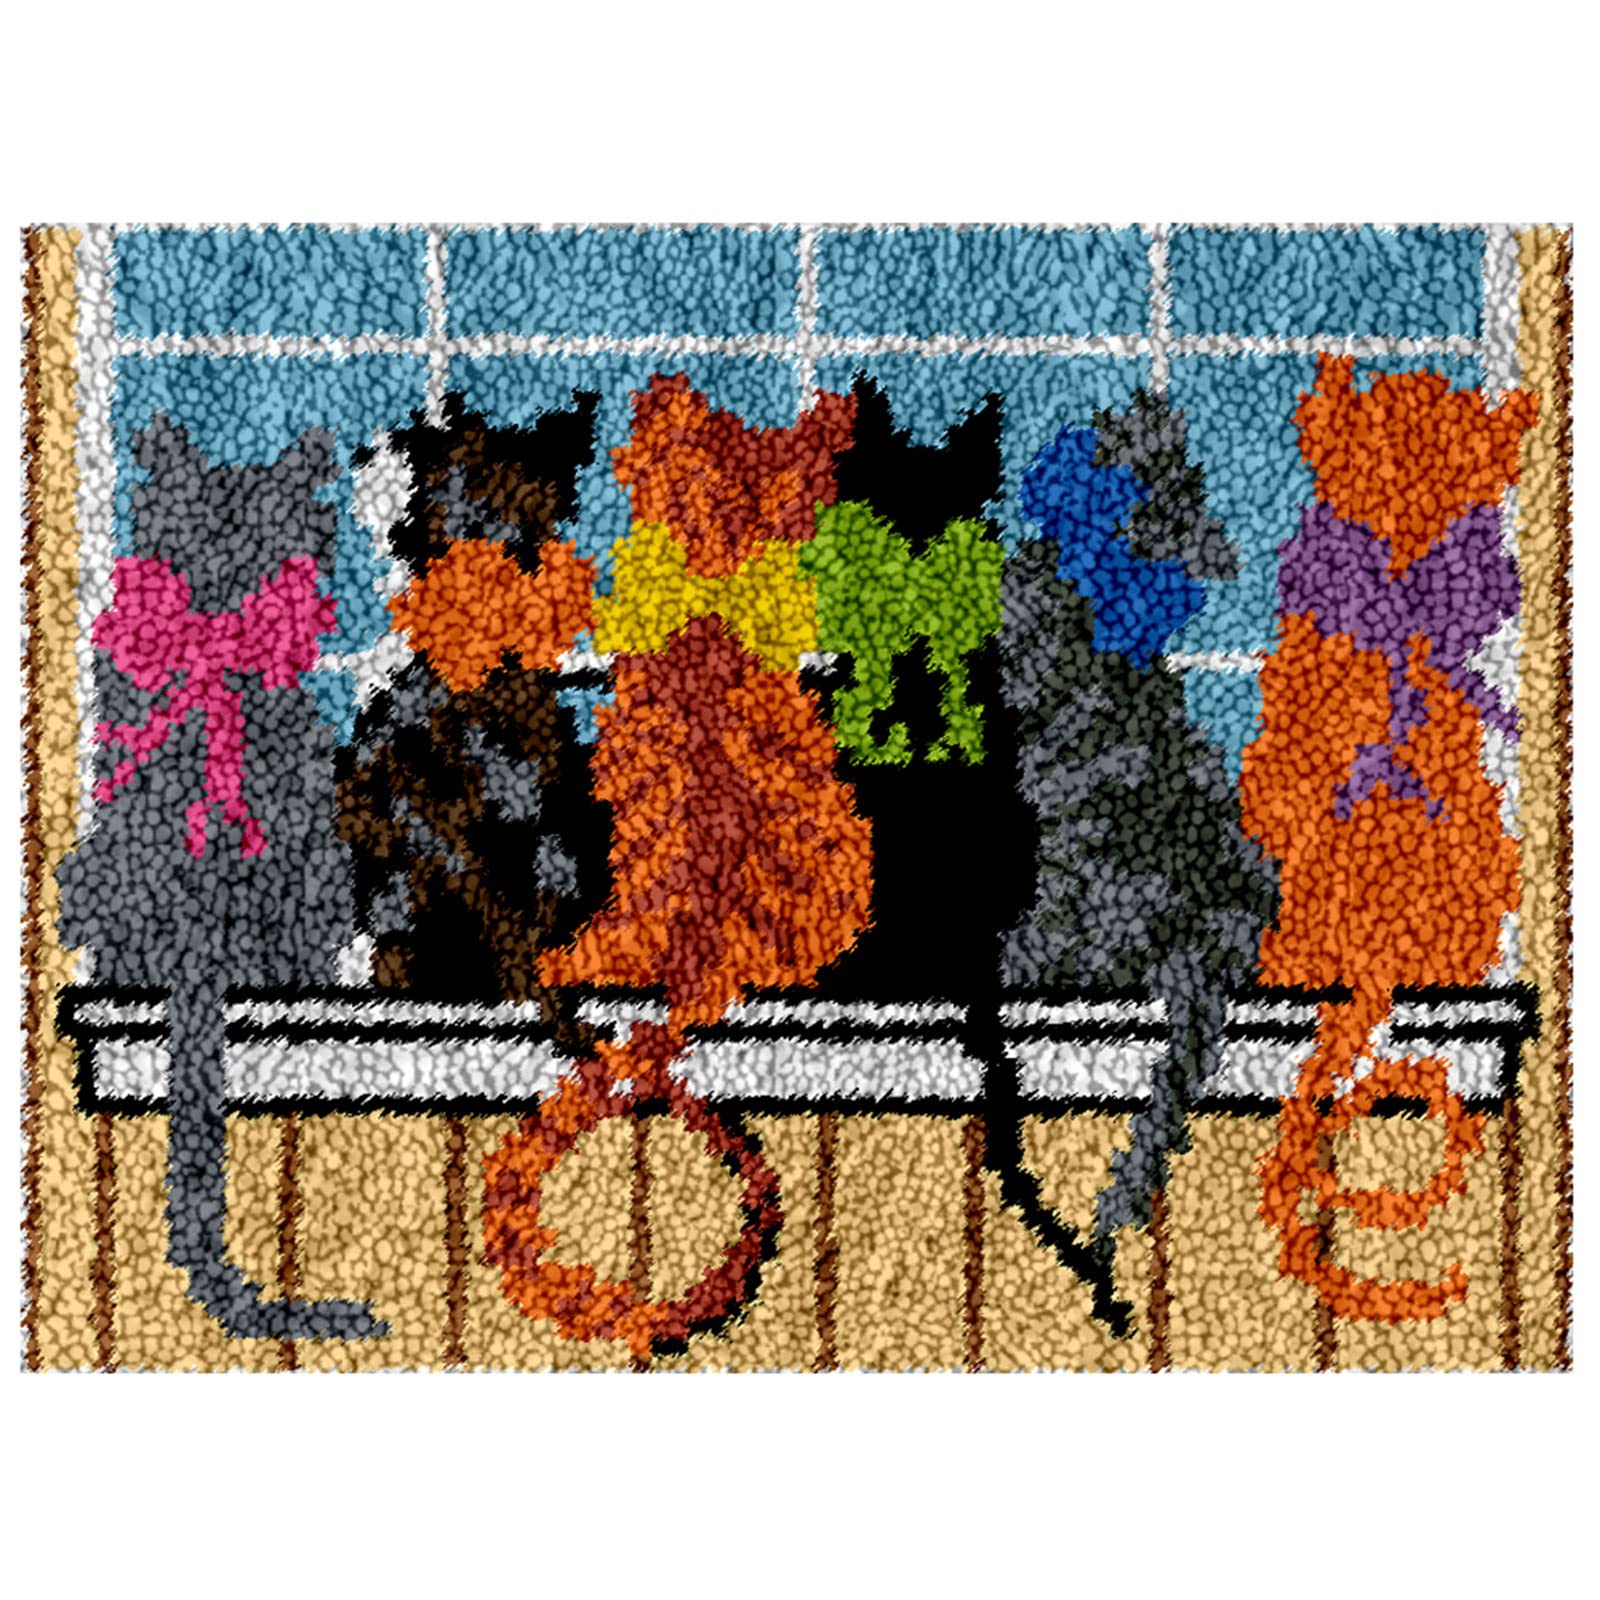 Latch hook rug kits for adults Canvas embroidery with pattern